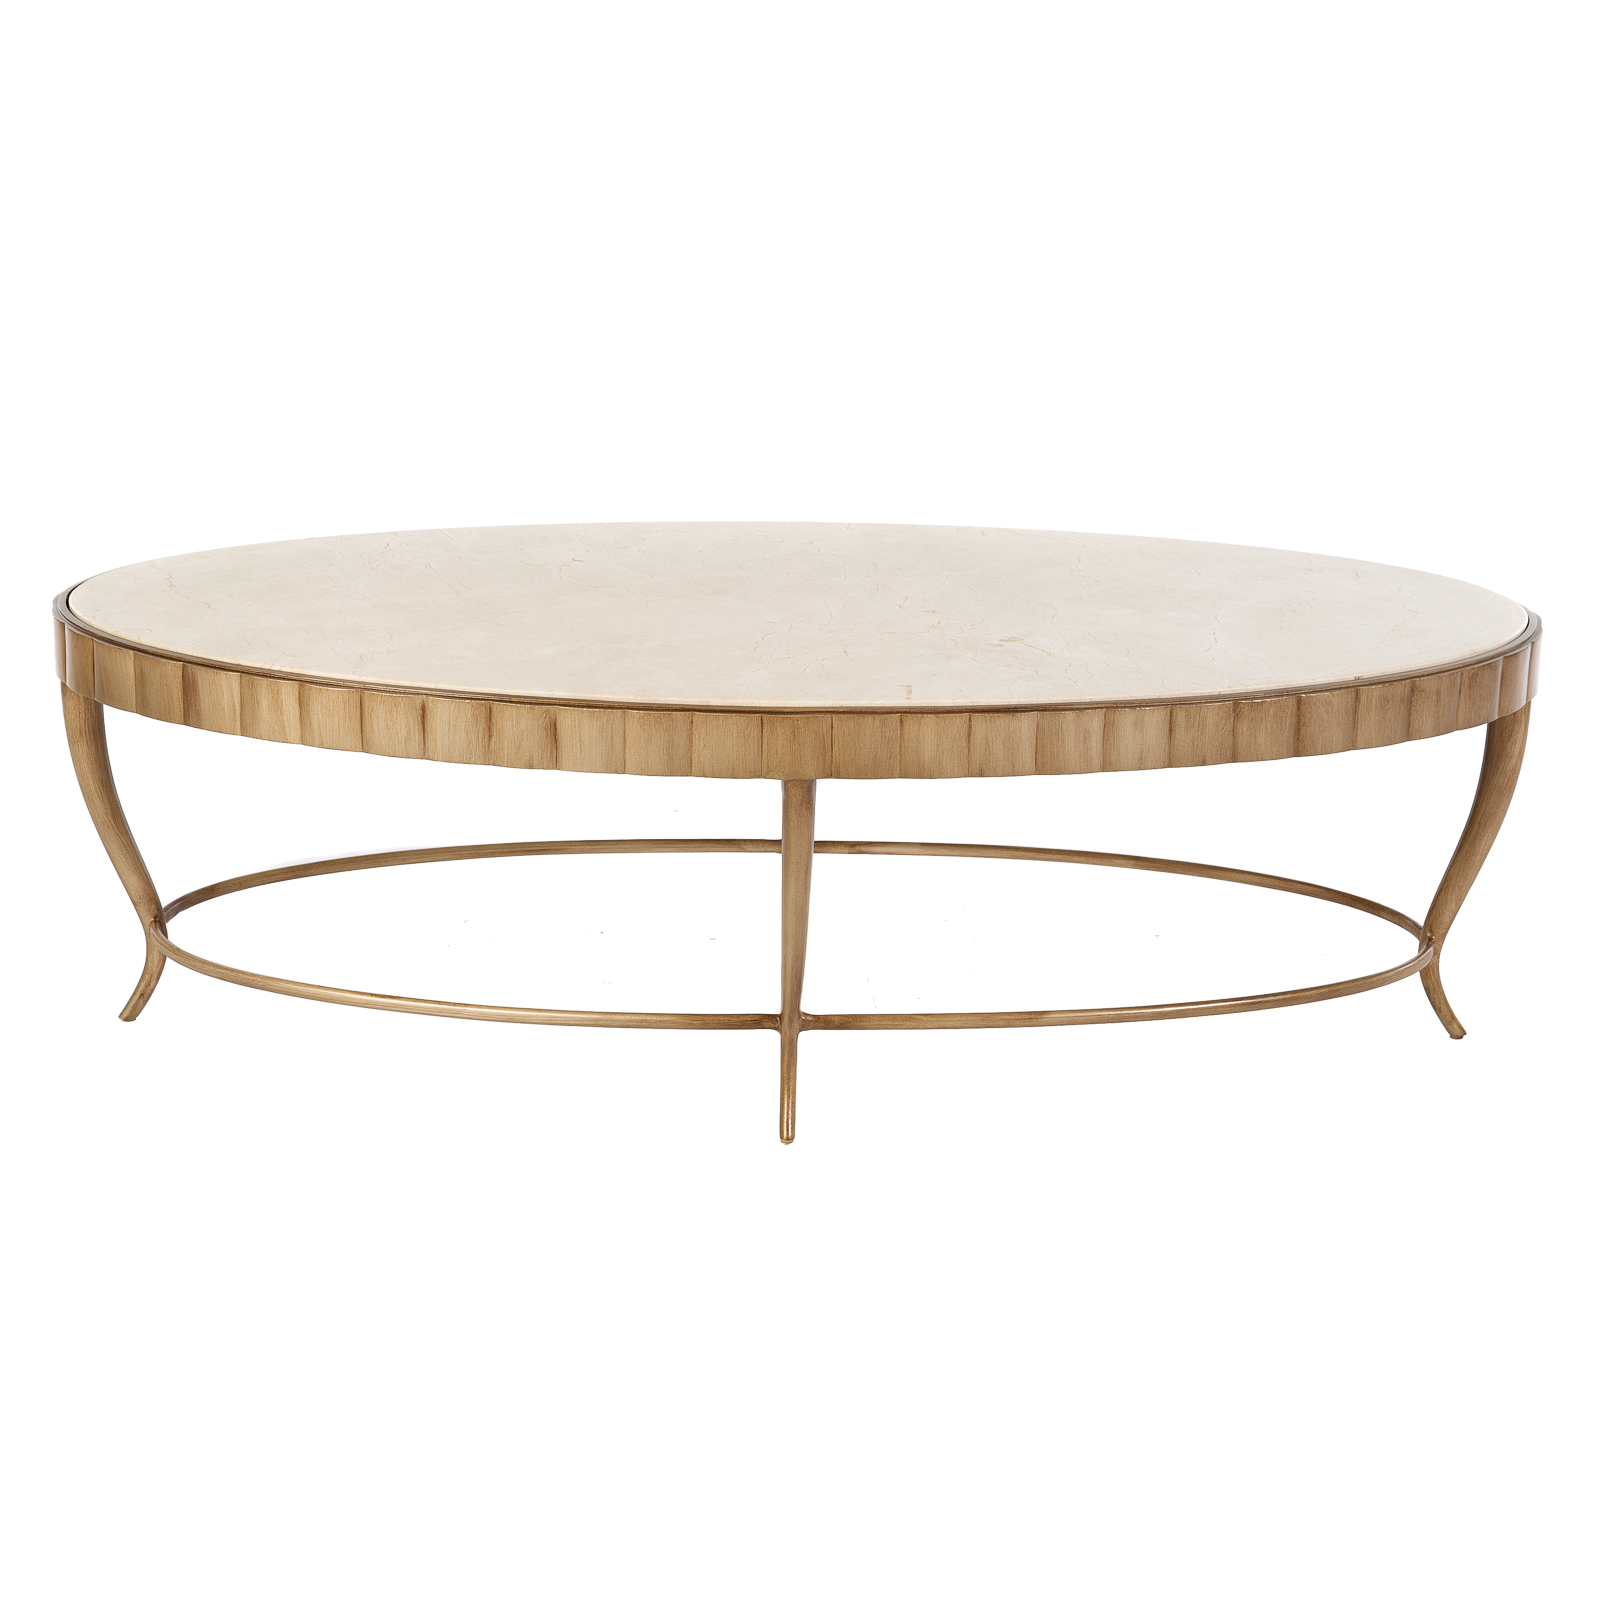 CONTEMPORARY OVAL STONE TOP COFFEE